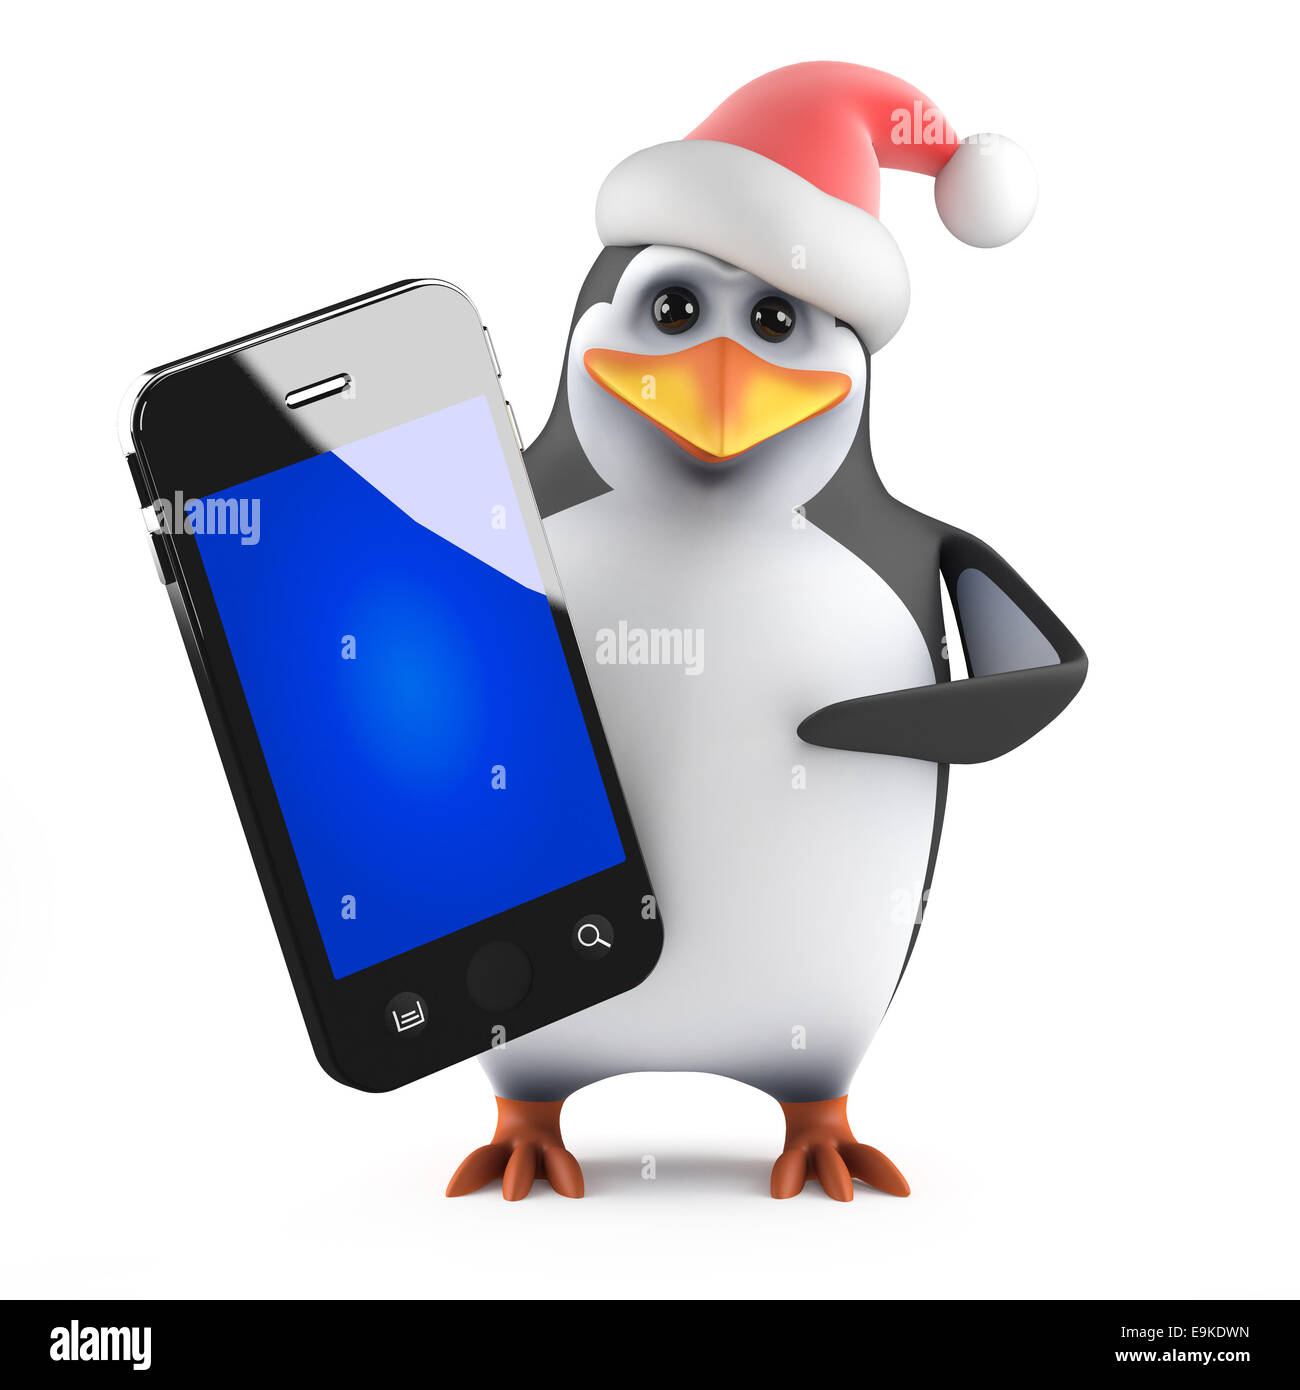 3d render of a penguin wearing a Santa Claus hat holding a smartphone Stock Photo